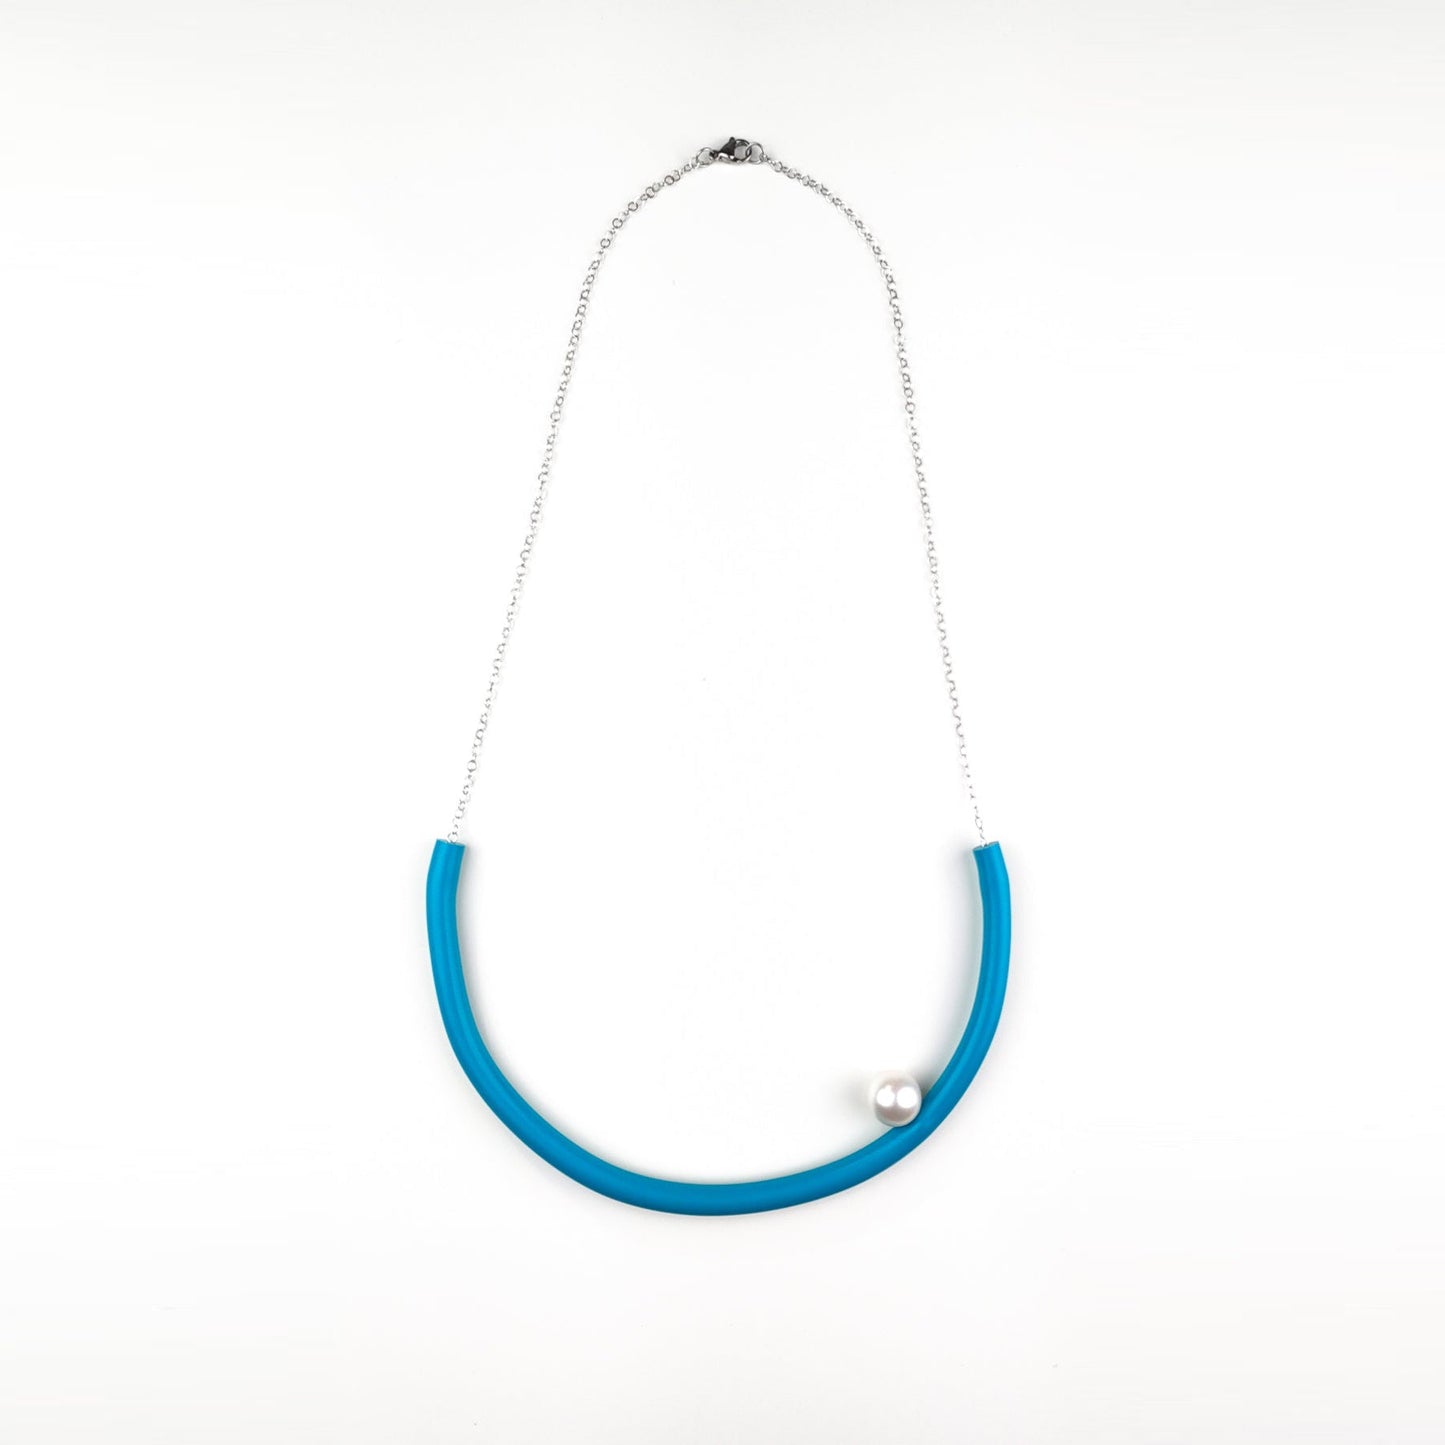 BILICO round necklace - teal color / white pearl